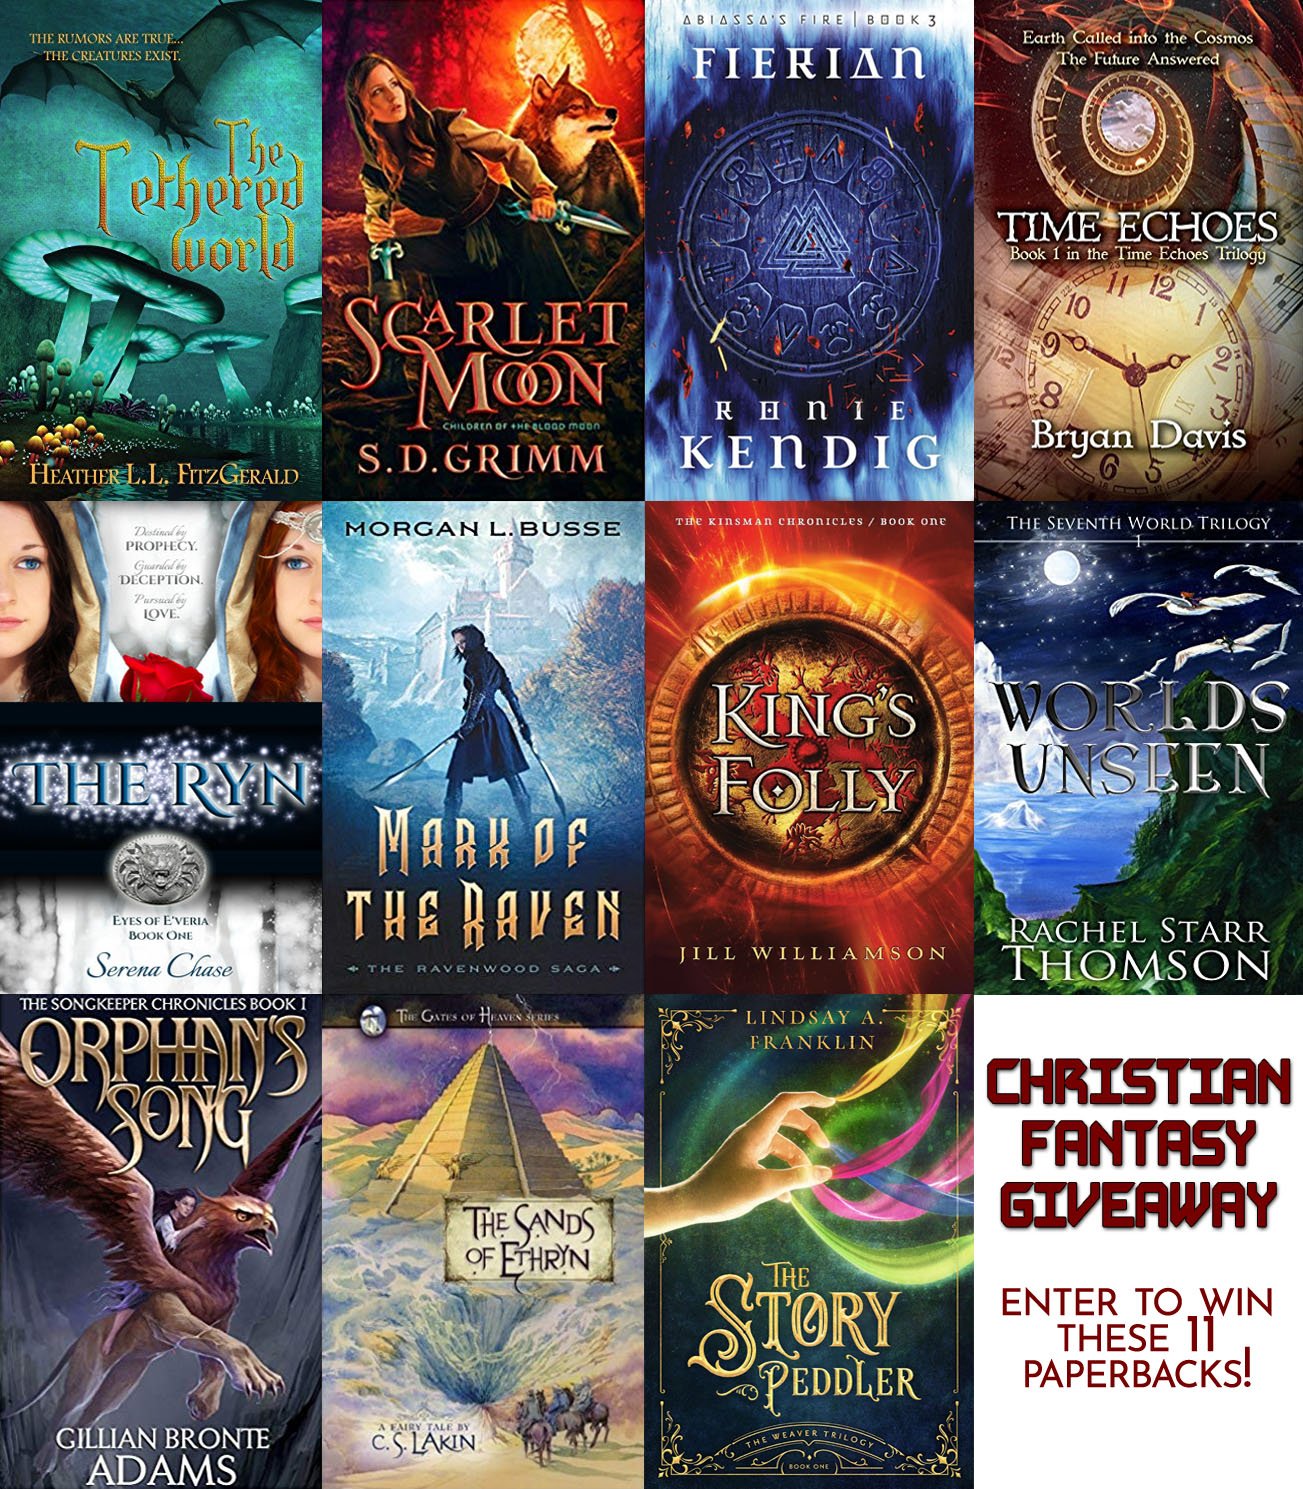 Incredible Christian Fantasy Giveaway: Meet the Authors and Their Books